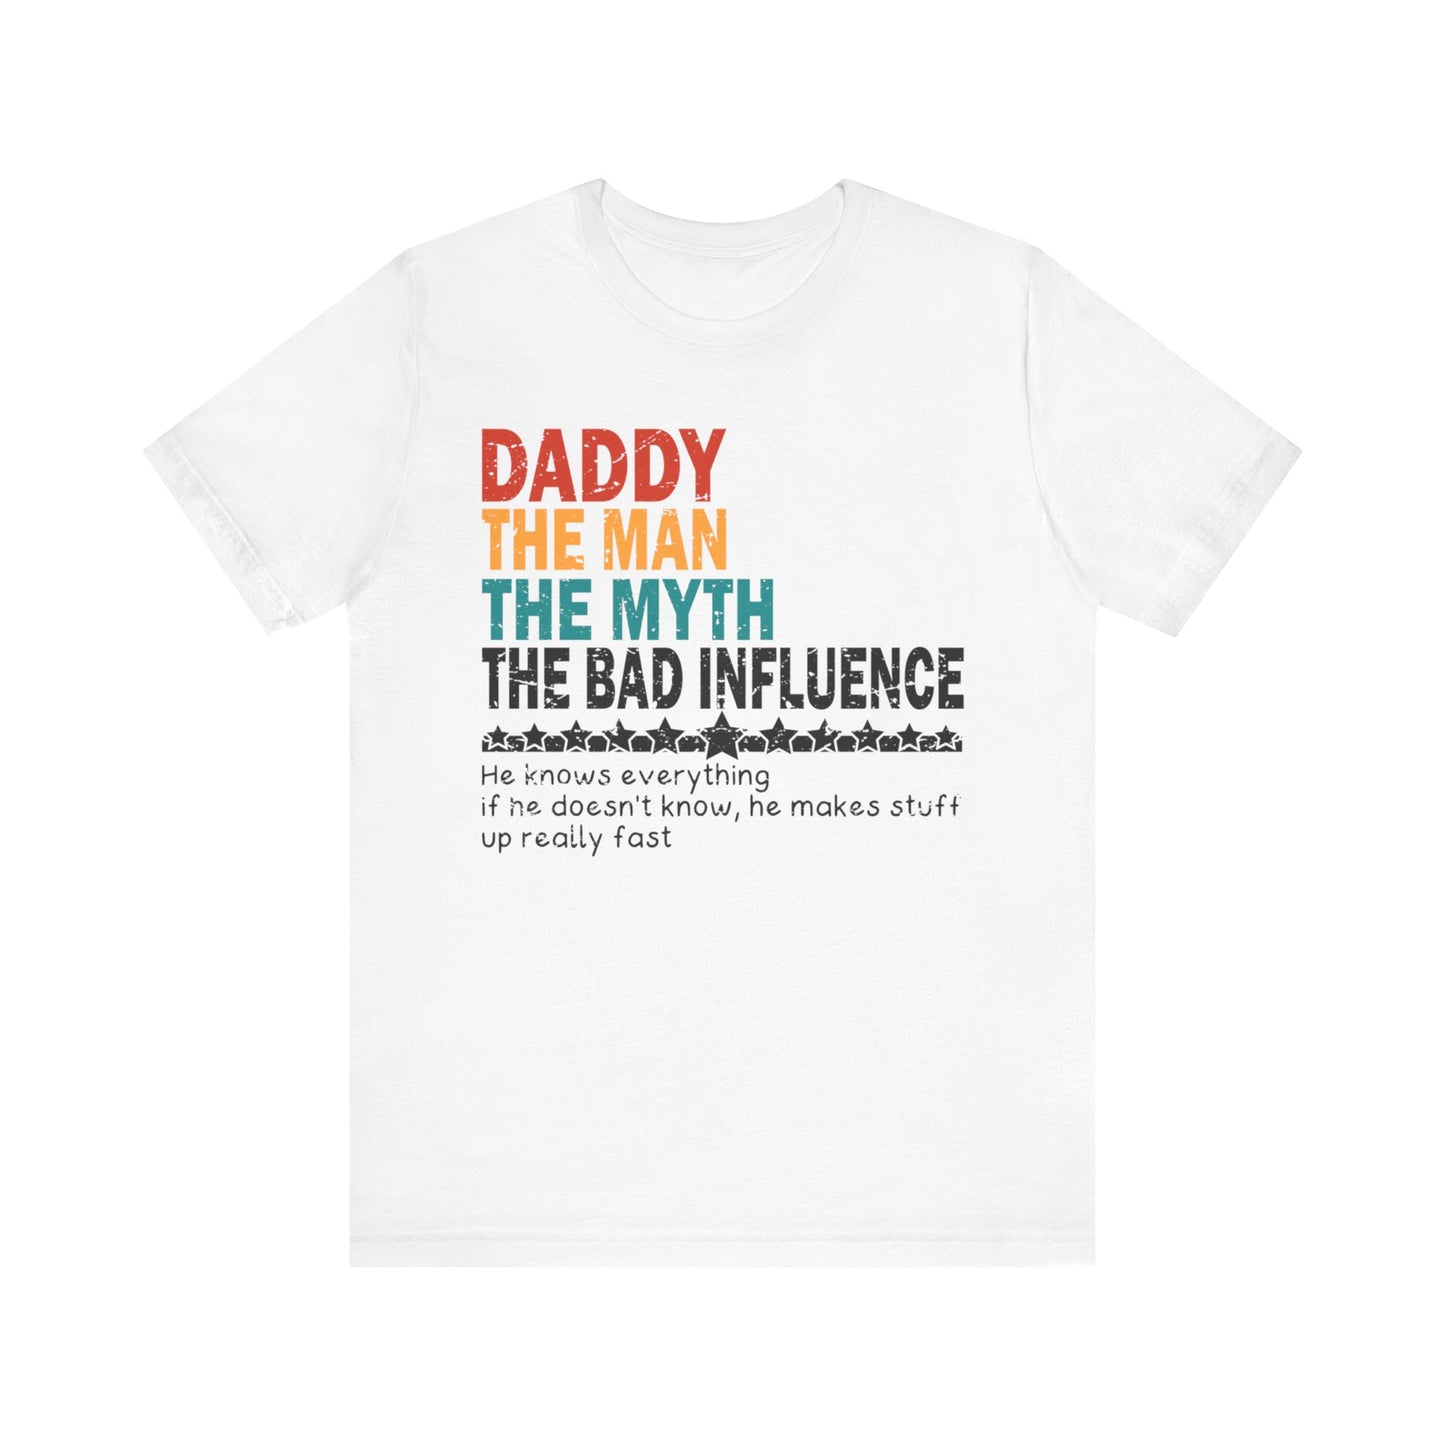 Daddy The Man The Myth The Bad Influence T-shirt